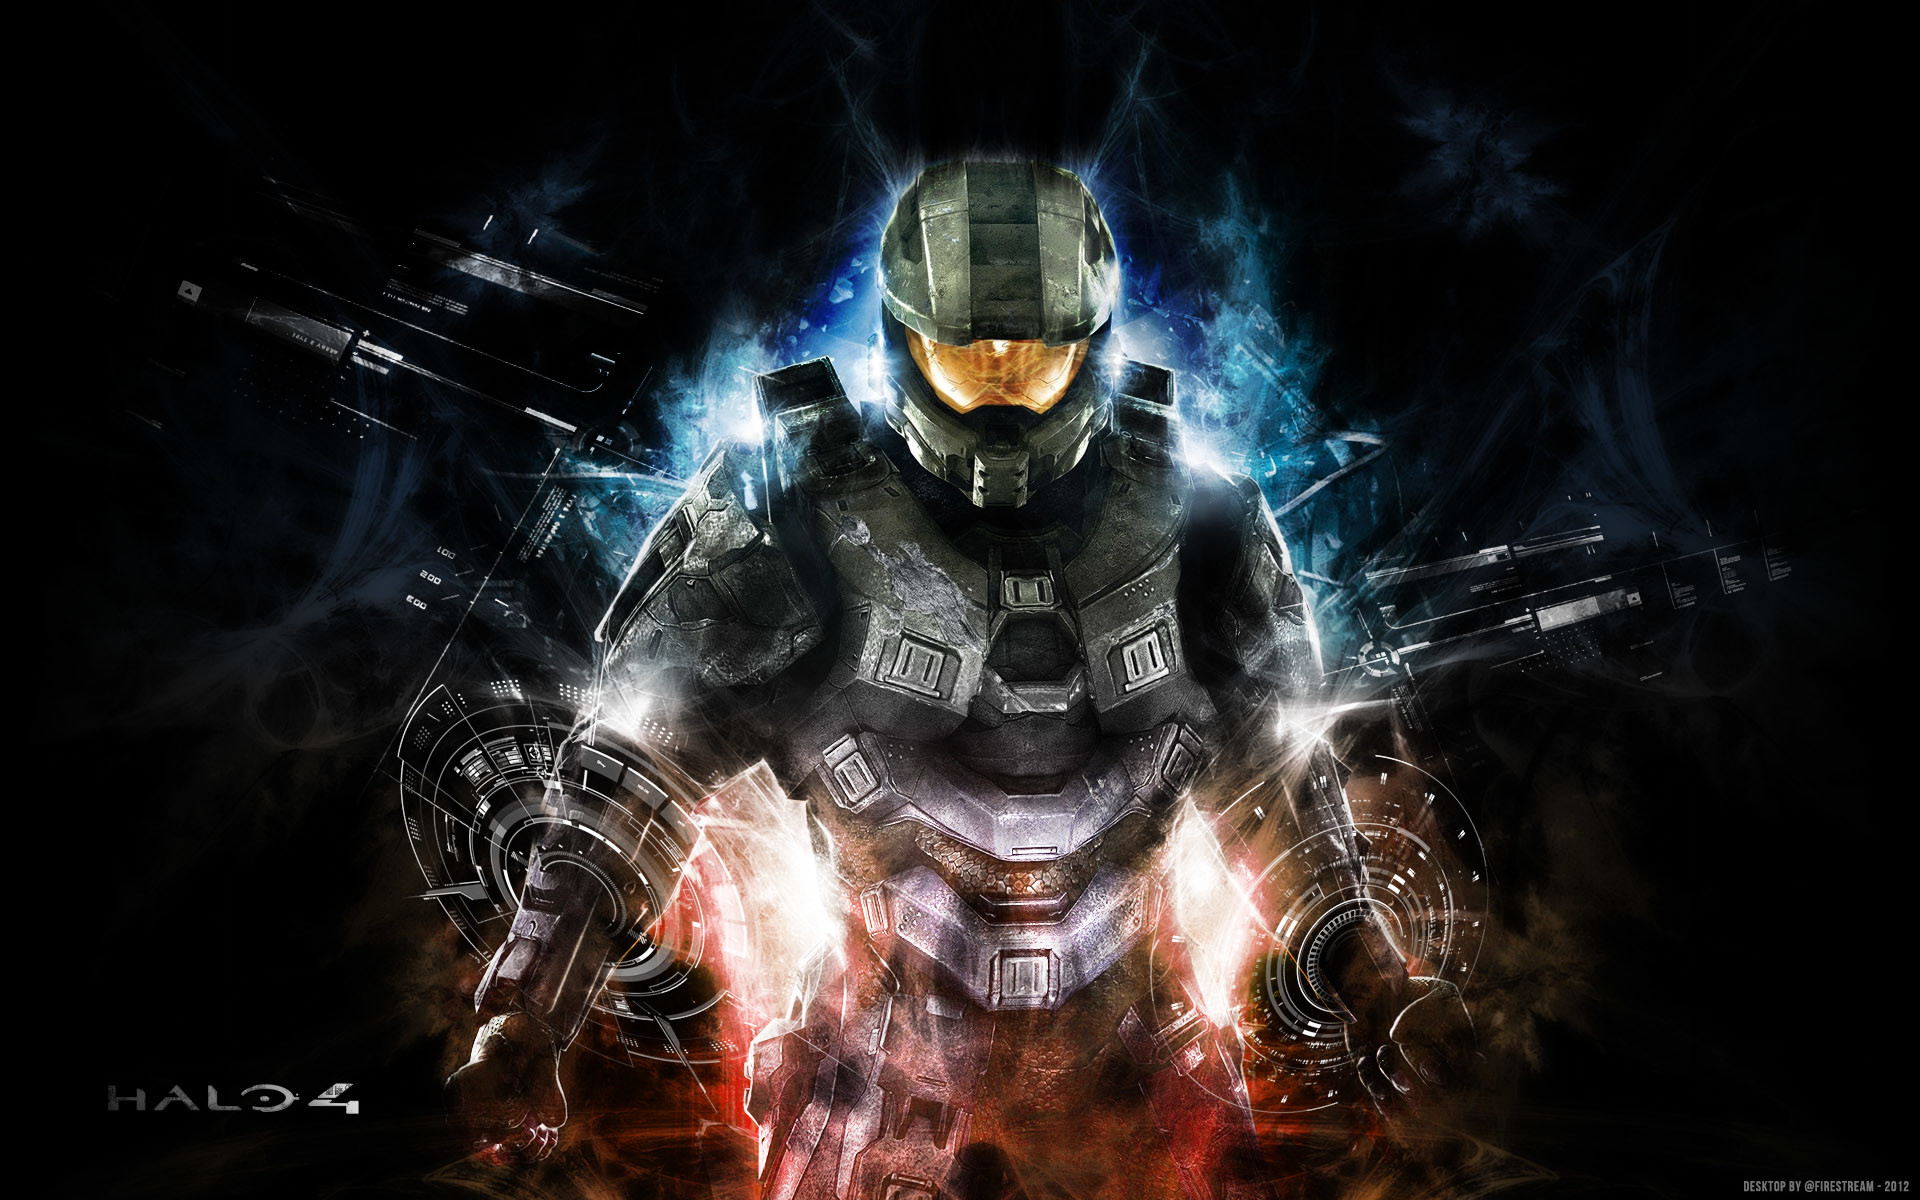 Awesome Halo Theme With HD Wallpapers 1280720 Halo 4 Wallpapers HD 51 Wallpapers